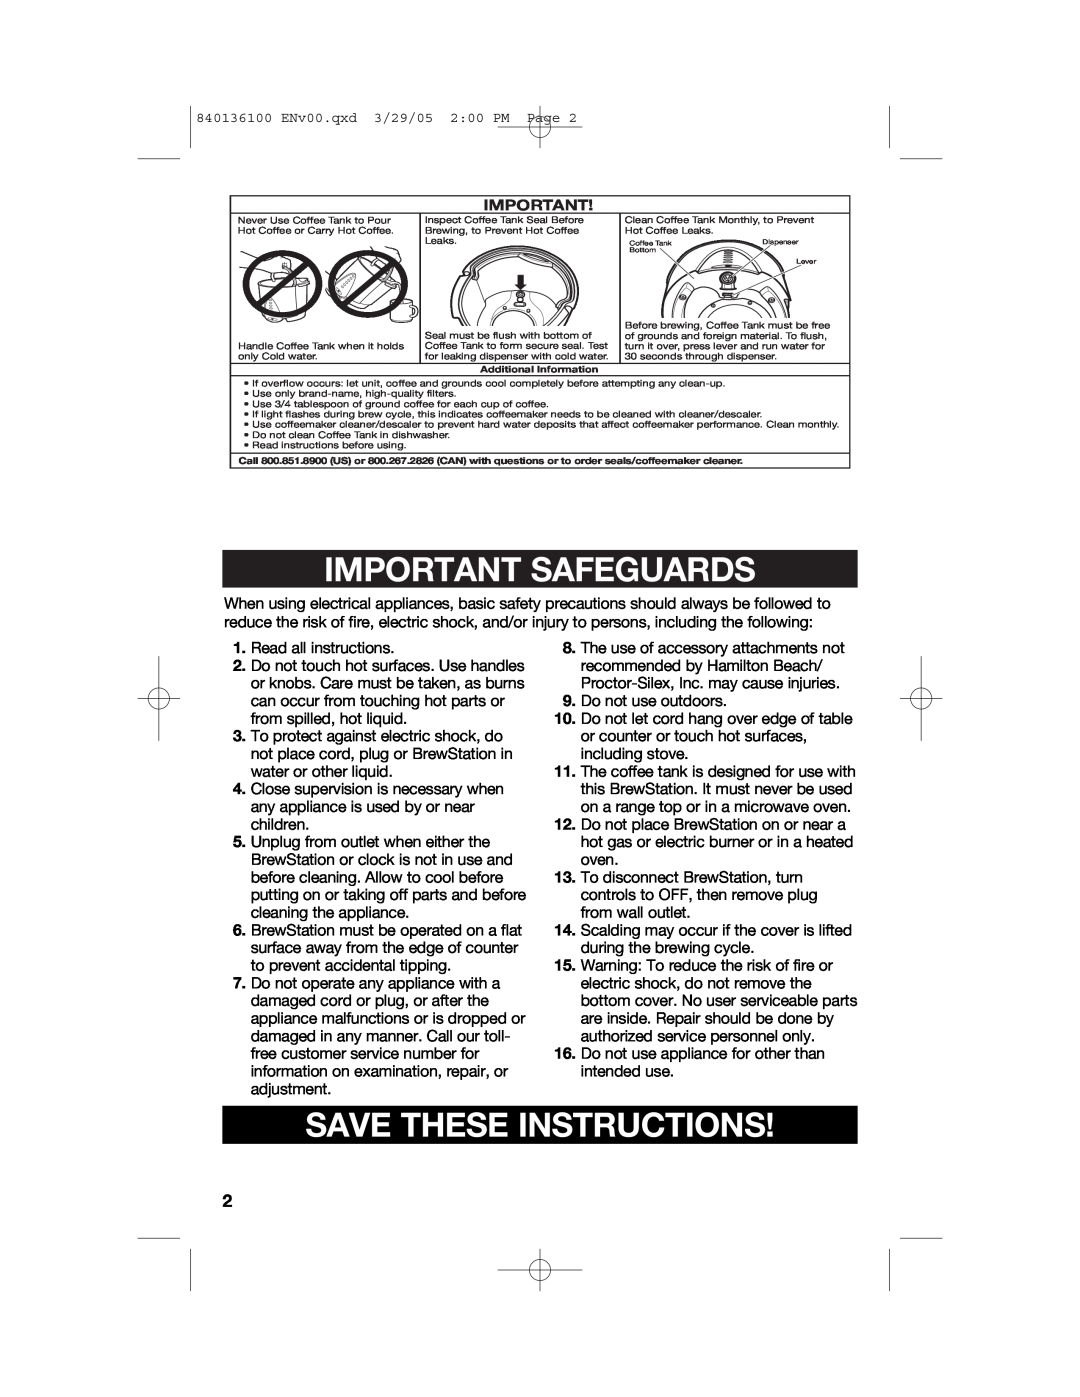 Hamilton Beach 840136100 manual Important Safeguards, Save These Instructions 